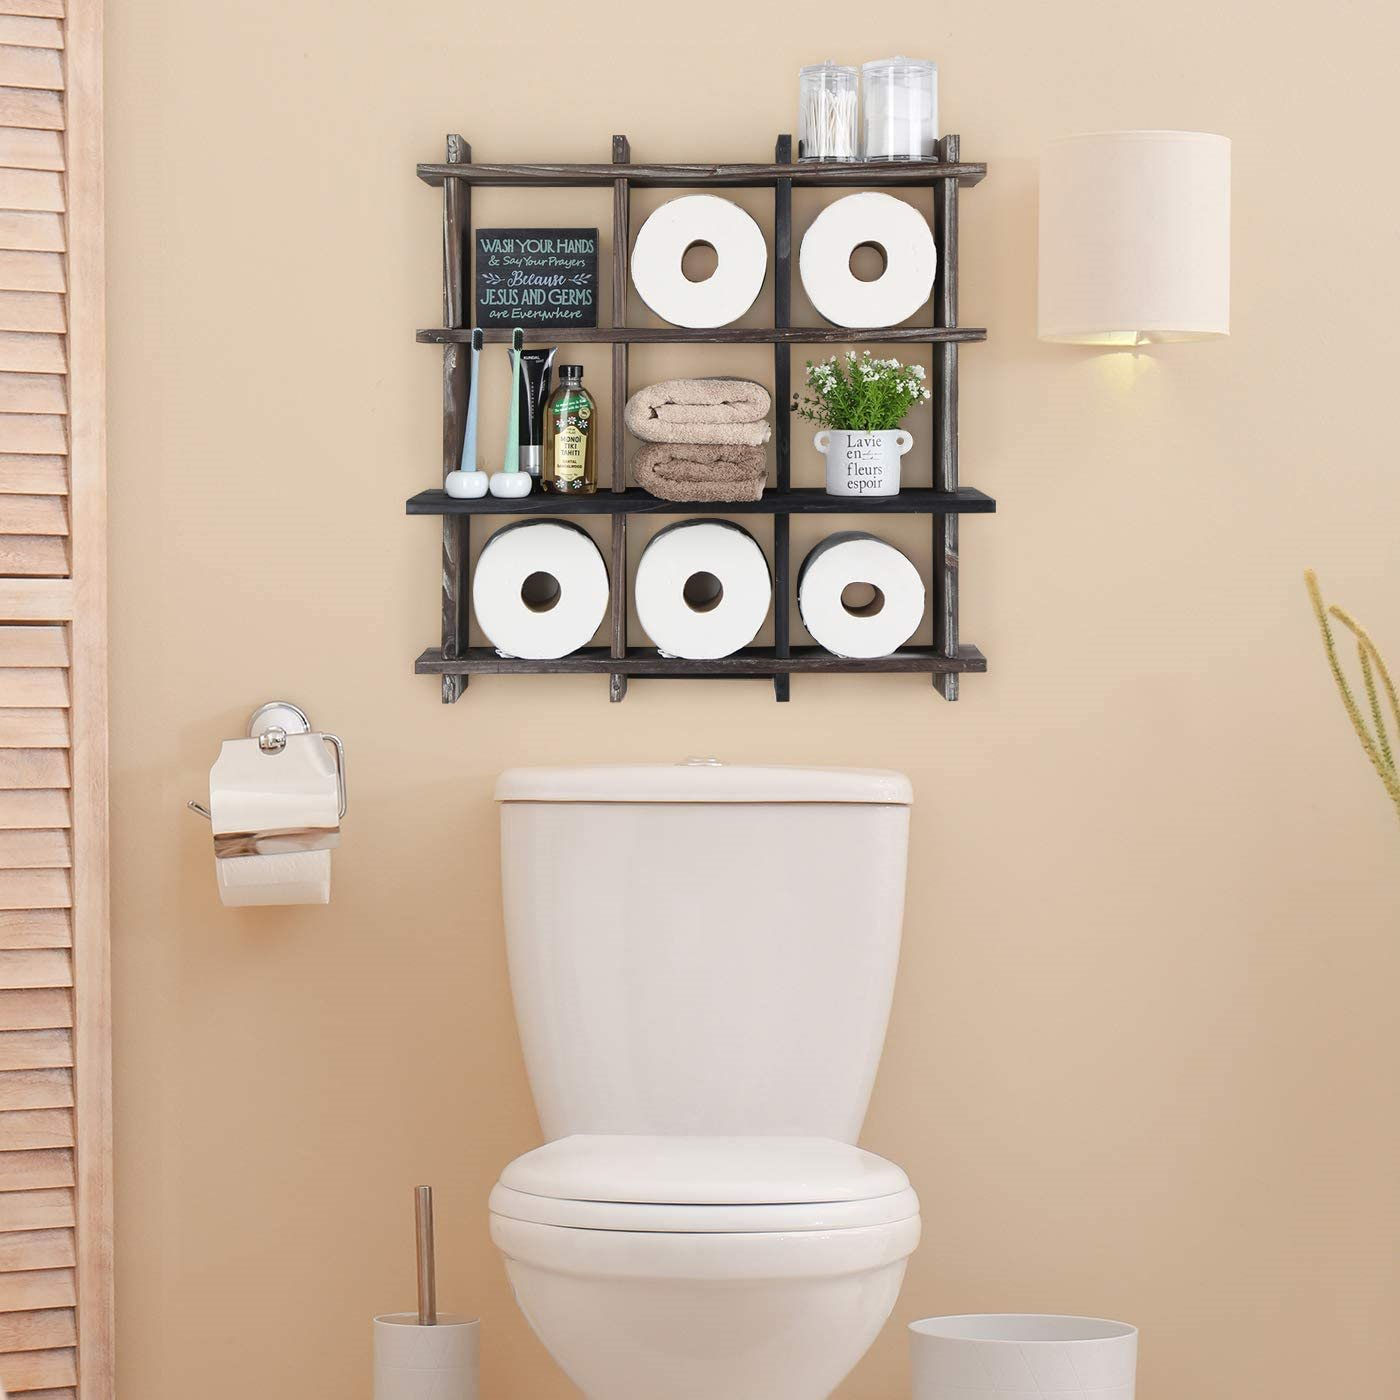 big-square-storage-divided-into-nine-small-squares-full-of-essentials-above-toilet-seat-13105.jpg